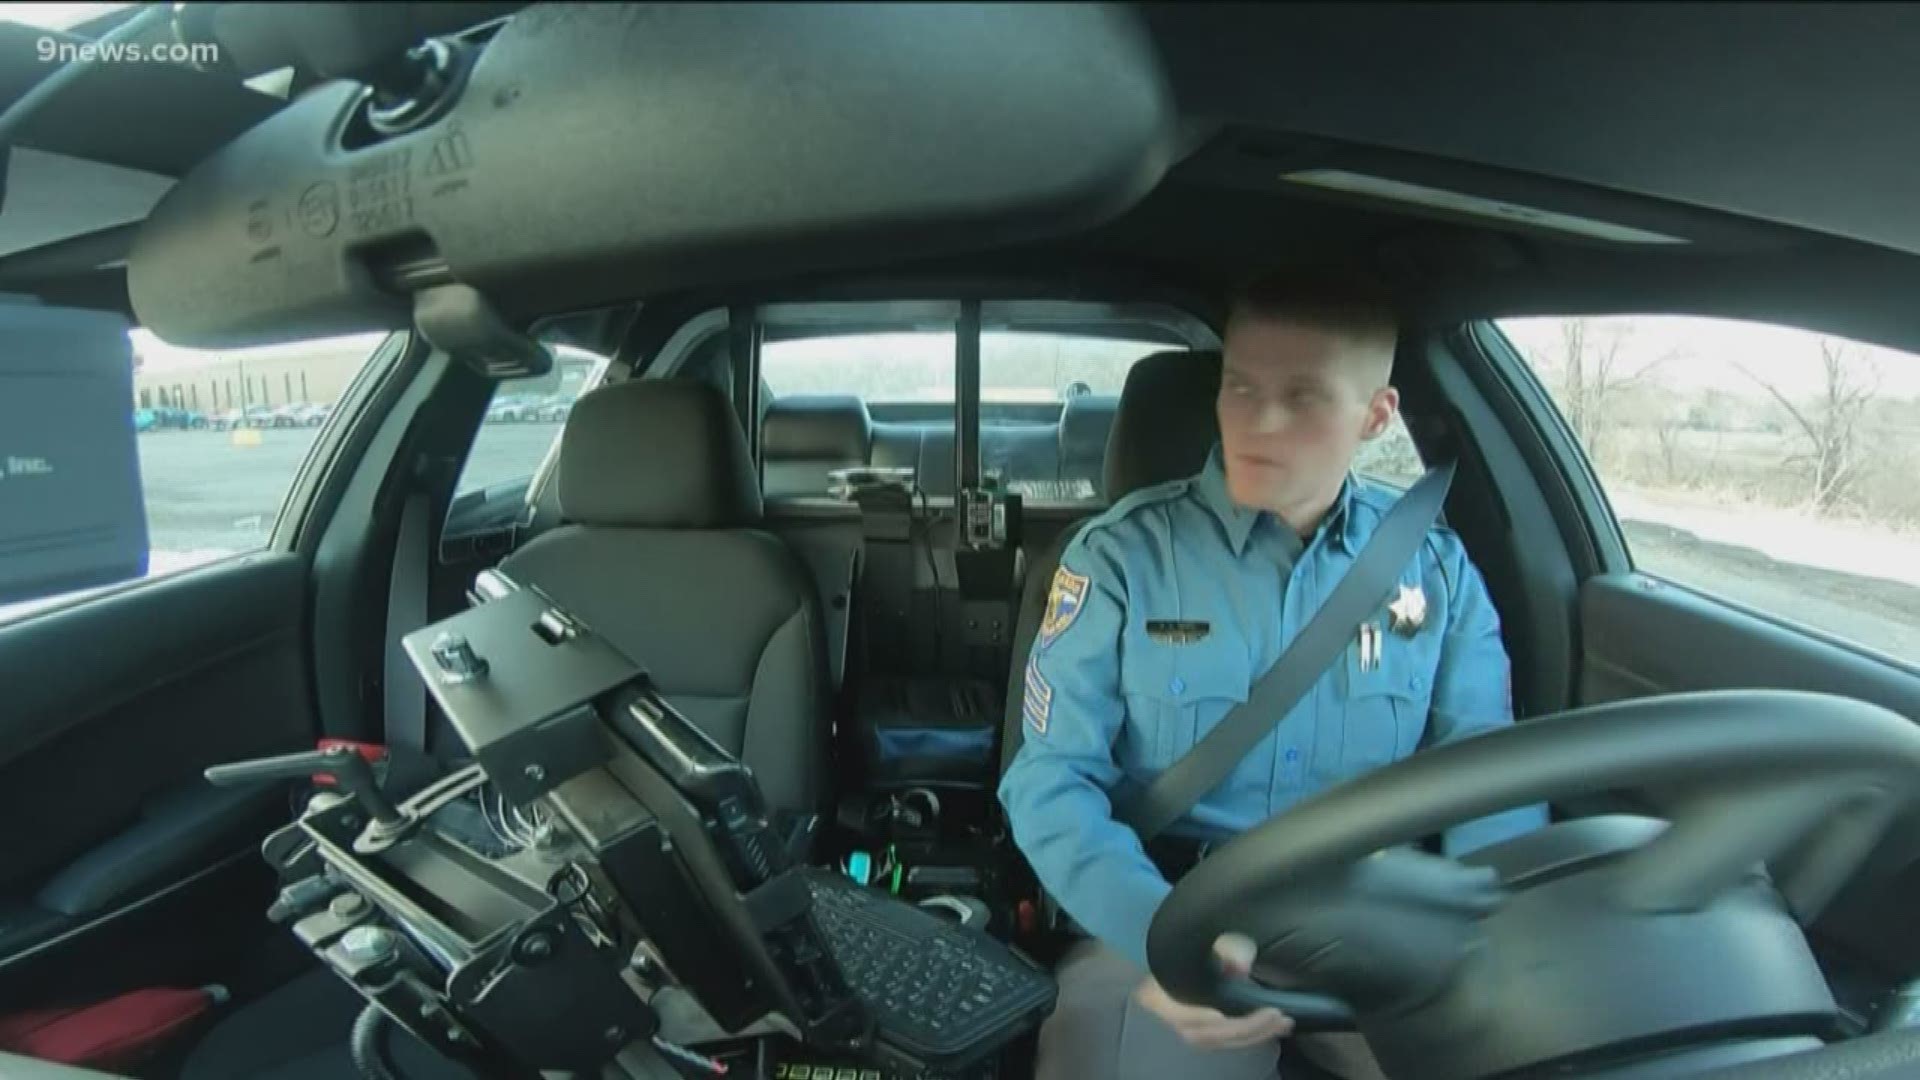 The Colorado State Patrol said they see an increase in impaired drivers between Thanksgiving and New Years.